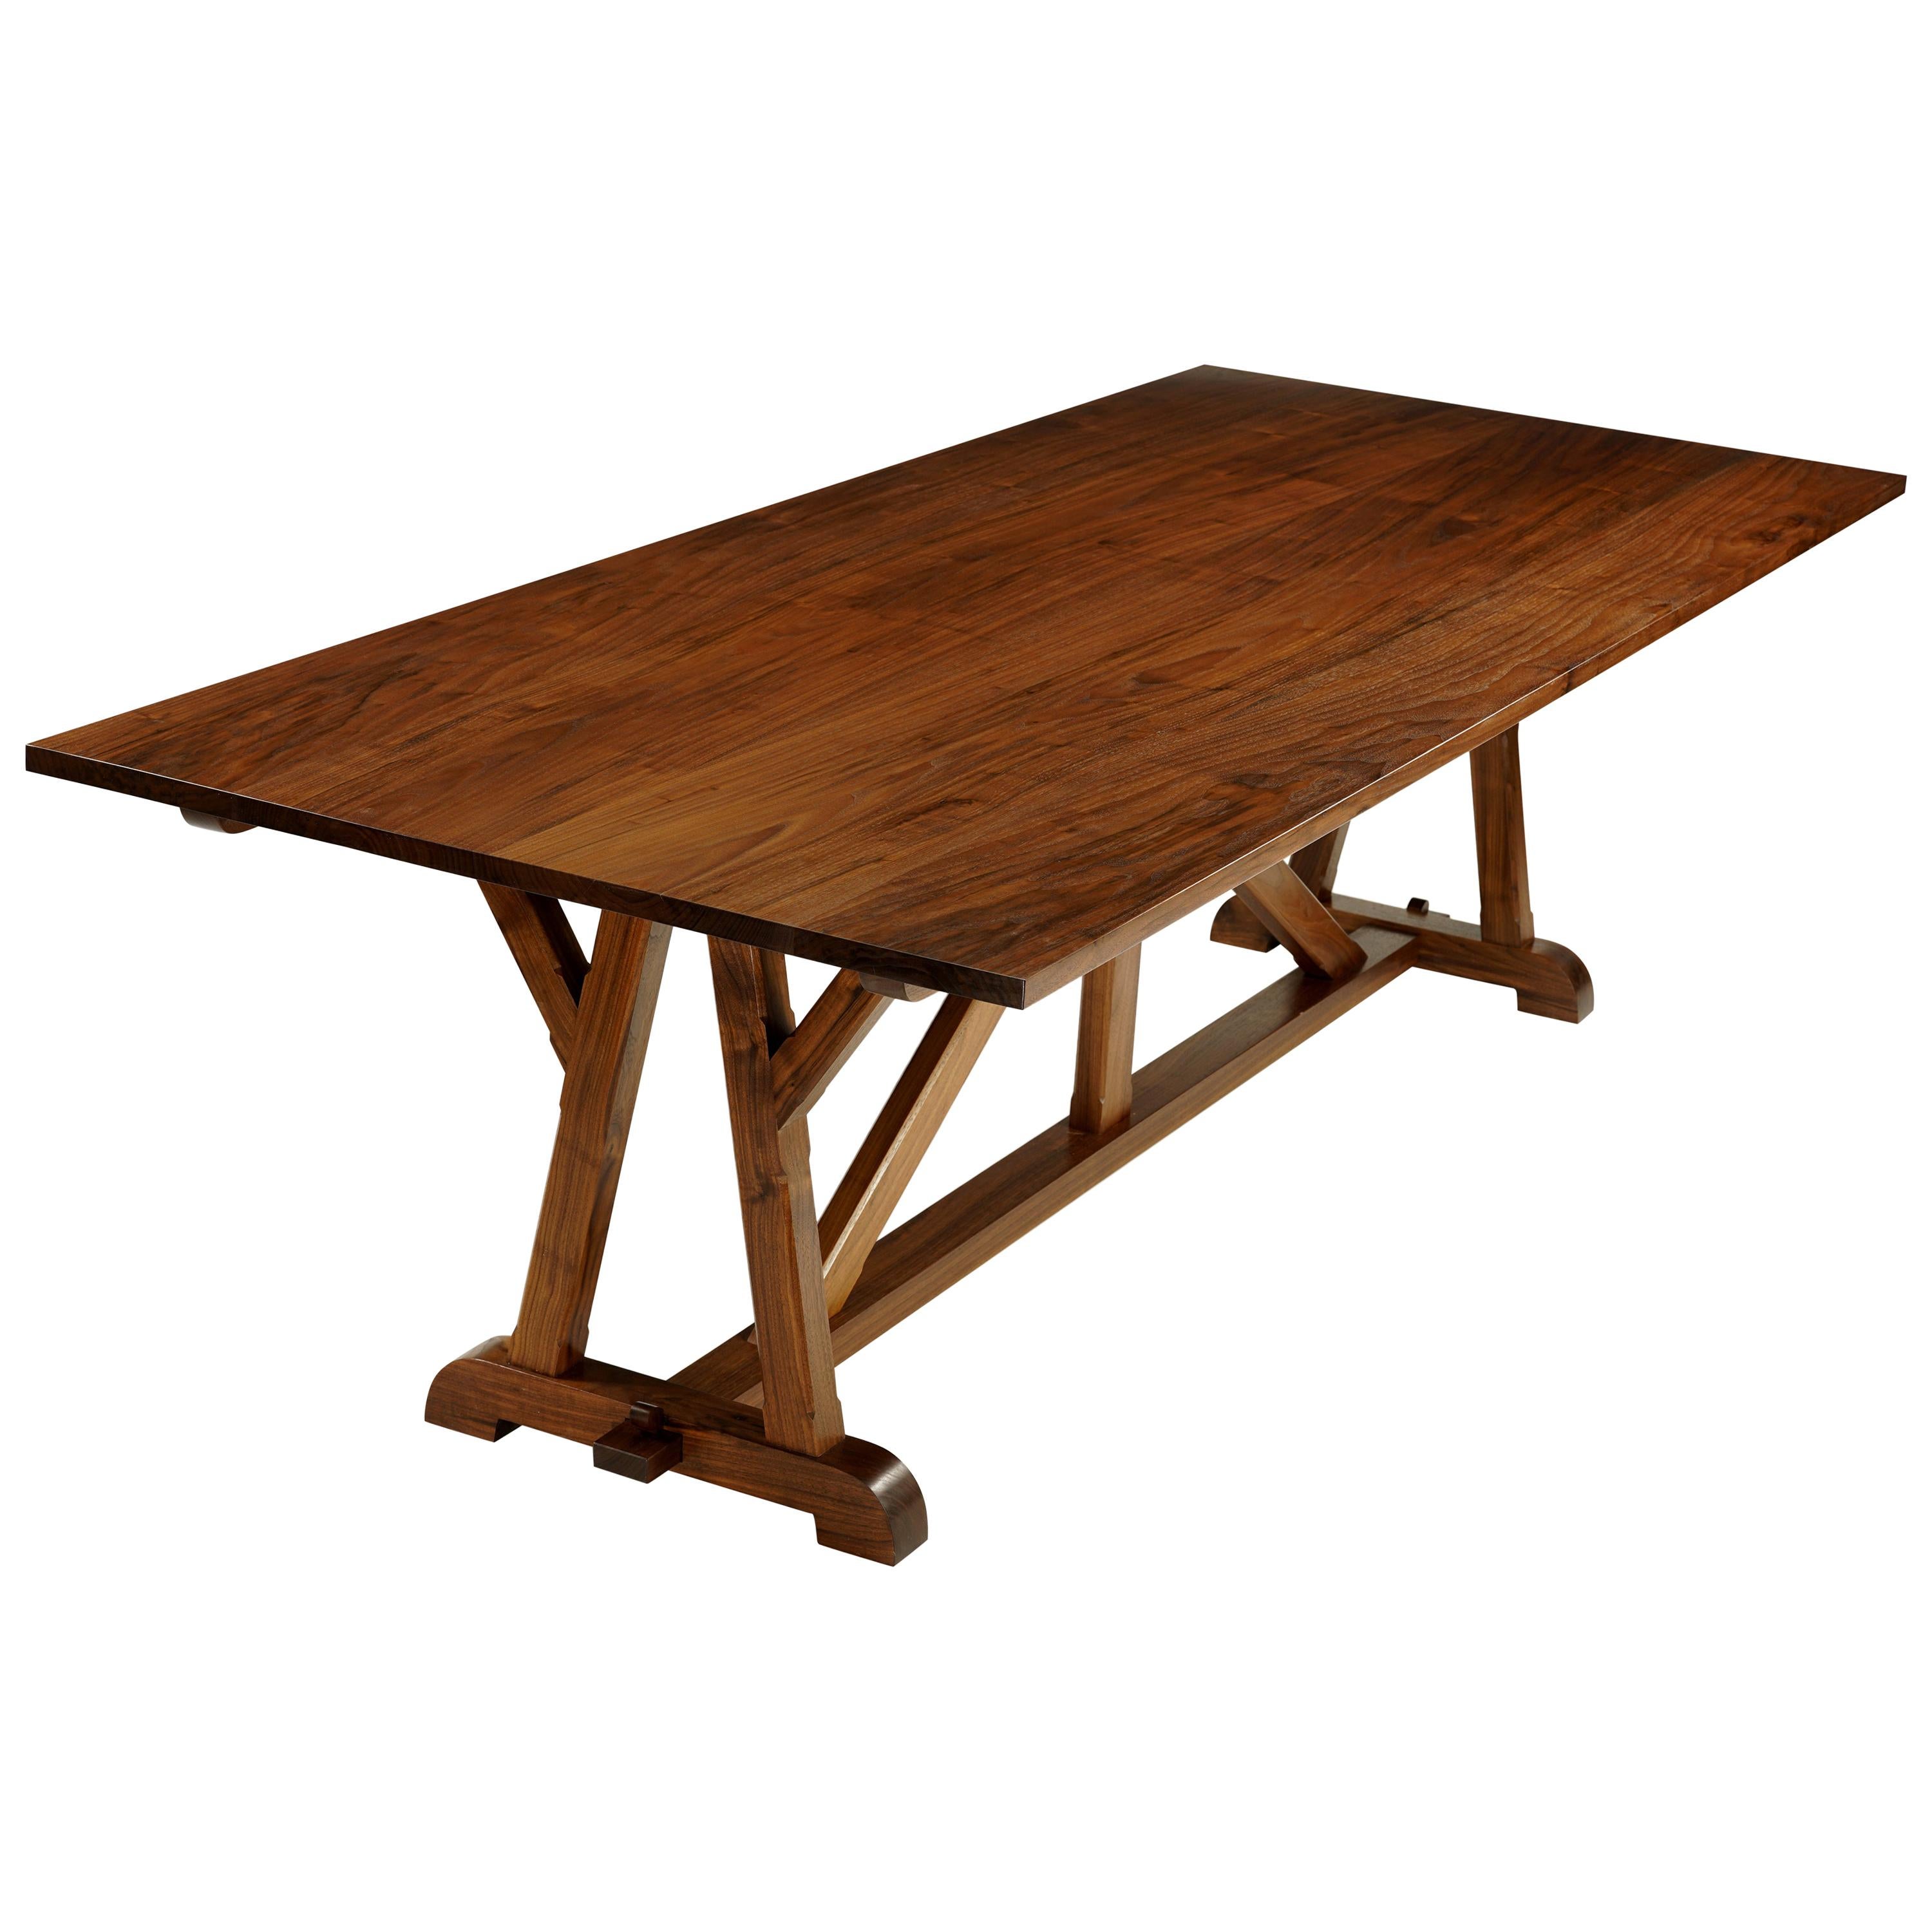 "Architects Table" Classic Arts & Crafts Dining Table in Walnut